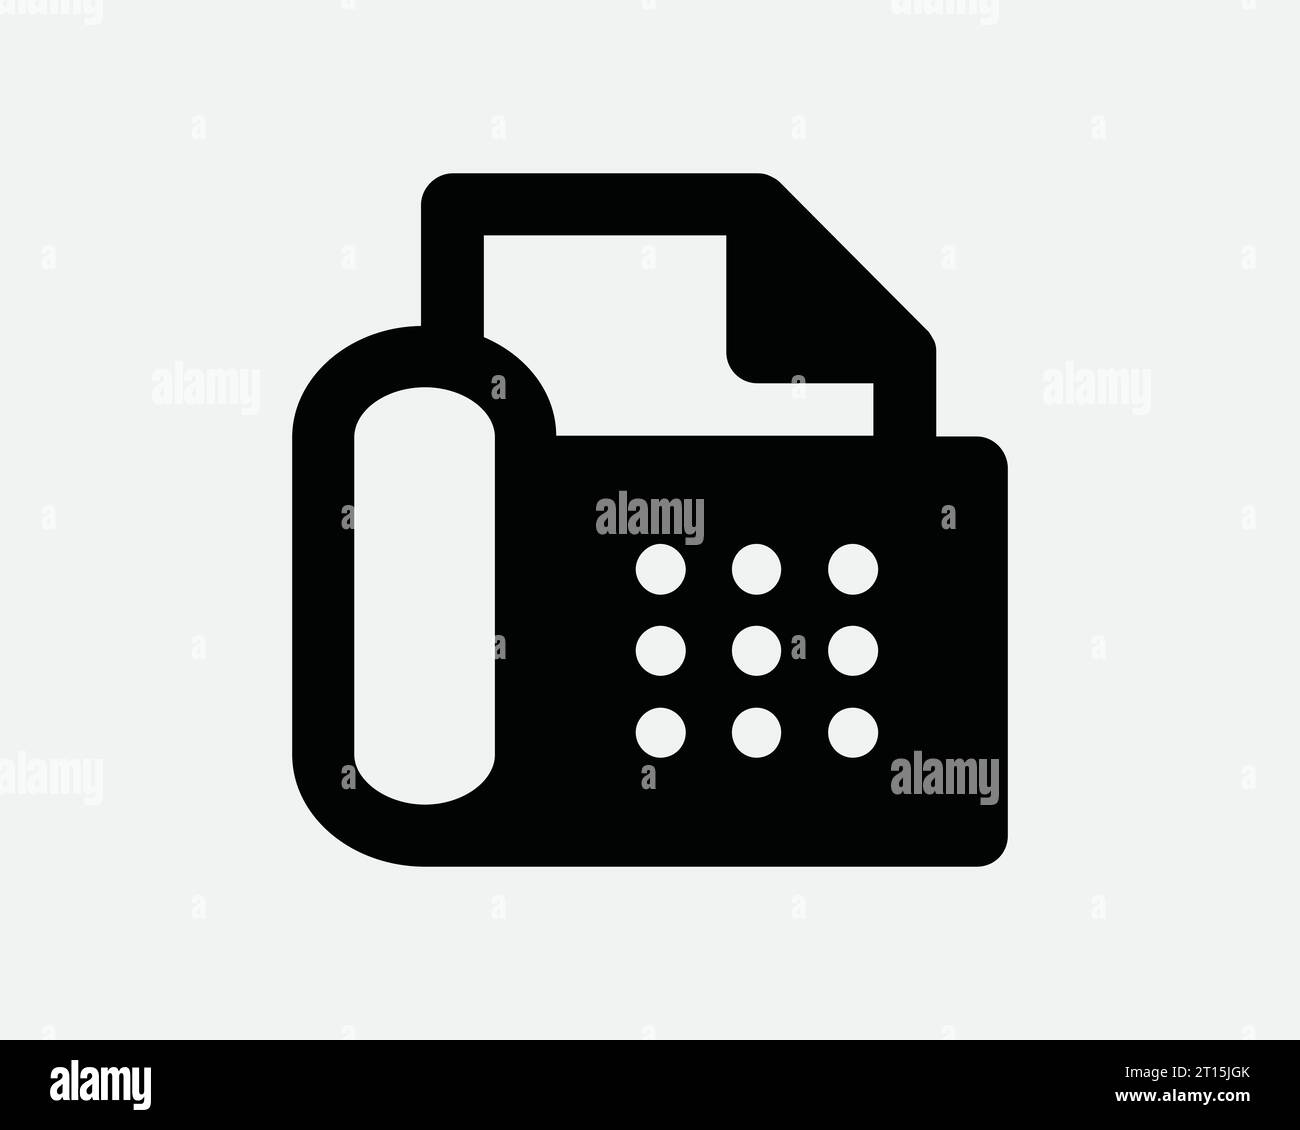 Fax Machine Icon Office Equipment Print Printer Device Phone Business Telephone Old Technology Black White Line Outline Shape Sign Symbol EPS Vector Stock Vector